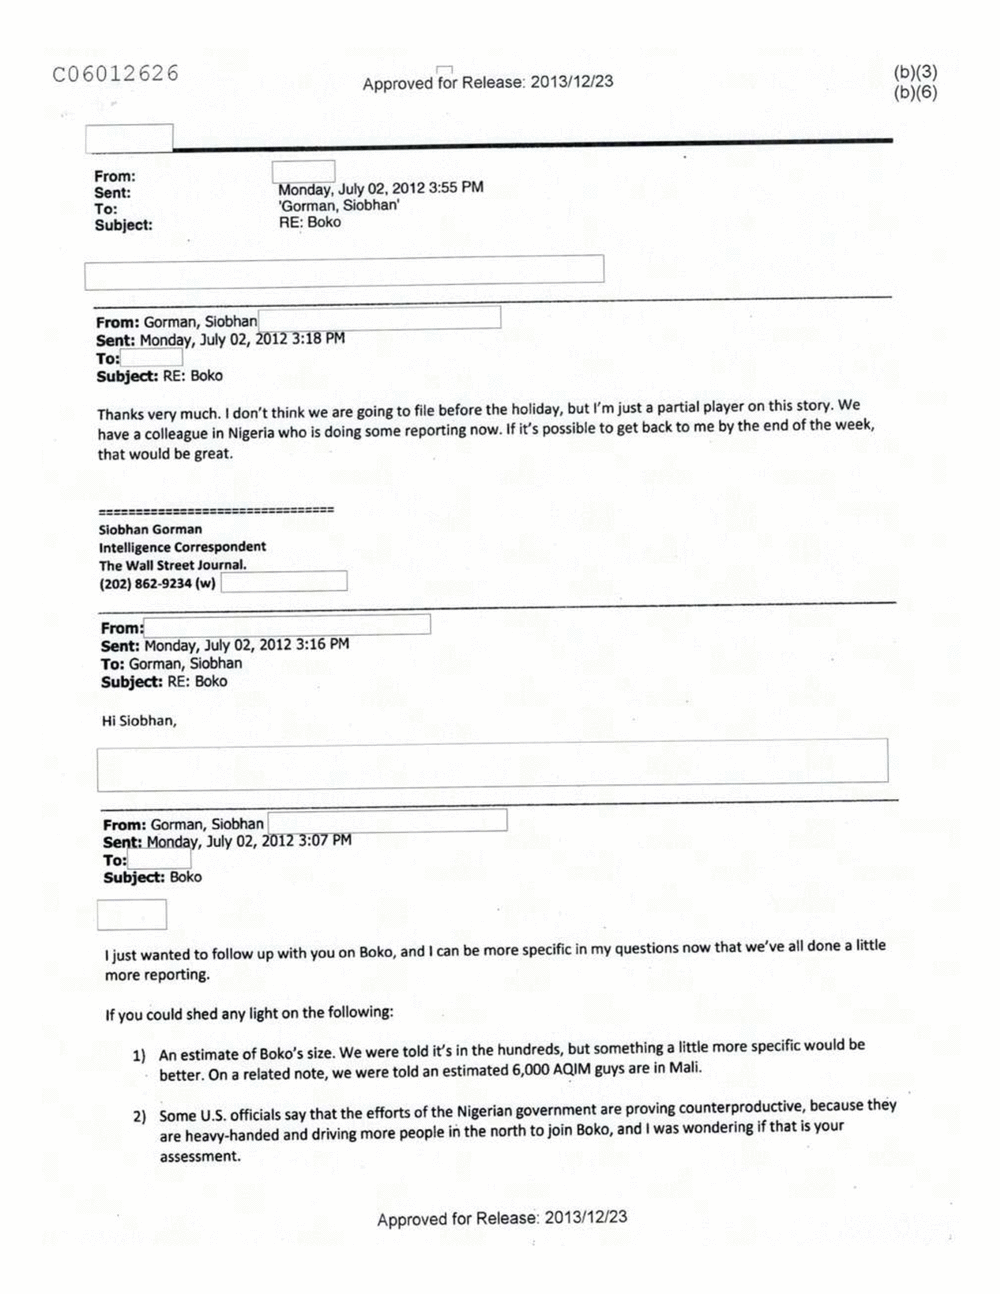 Page 181 from Email Correspondence Between Reporters and CIA Flacks